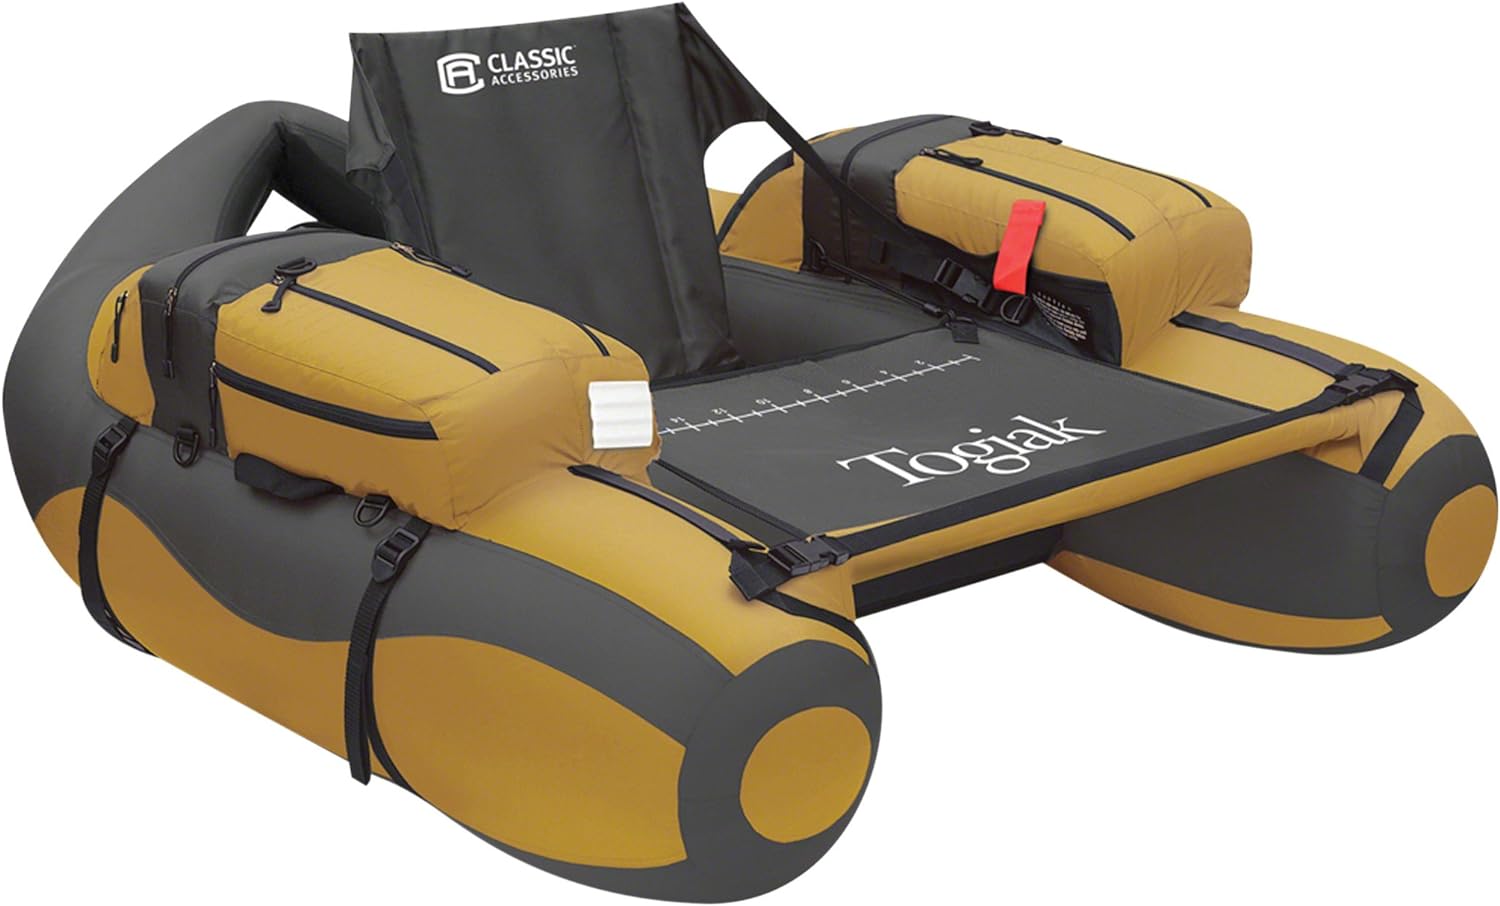 Classic Accessories Togiak Inflatable Fishing Float Tube